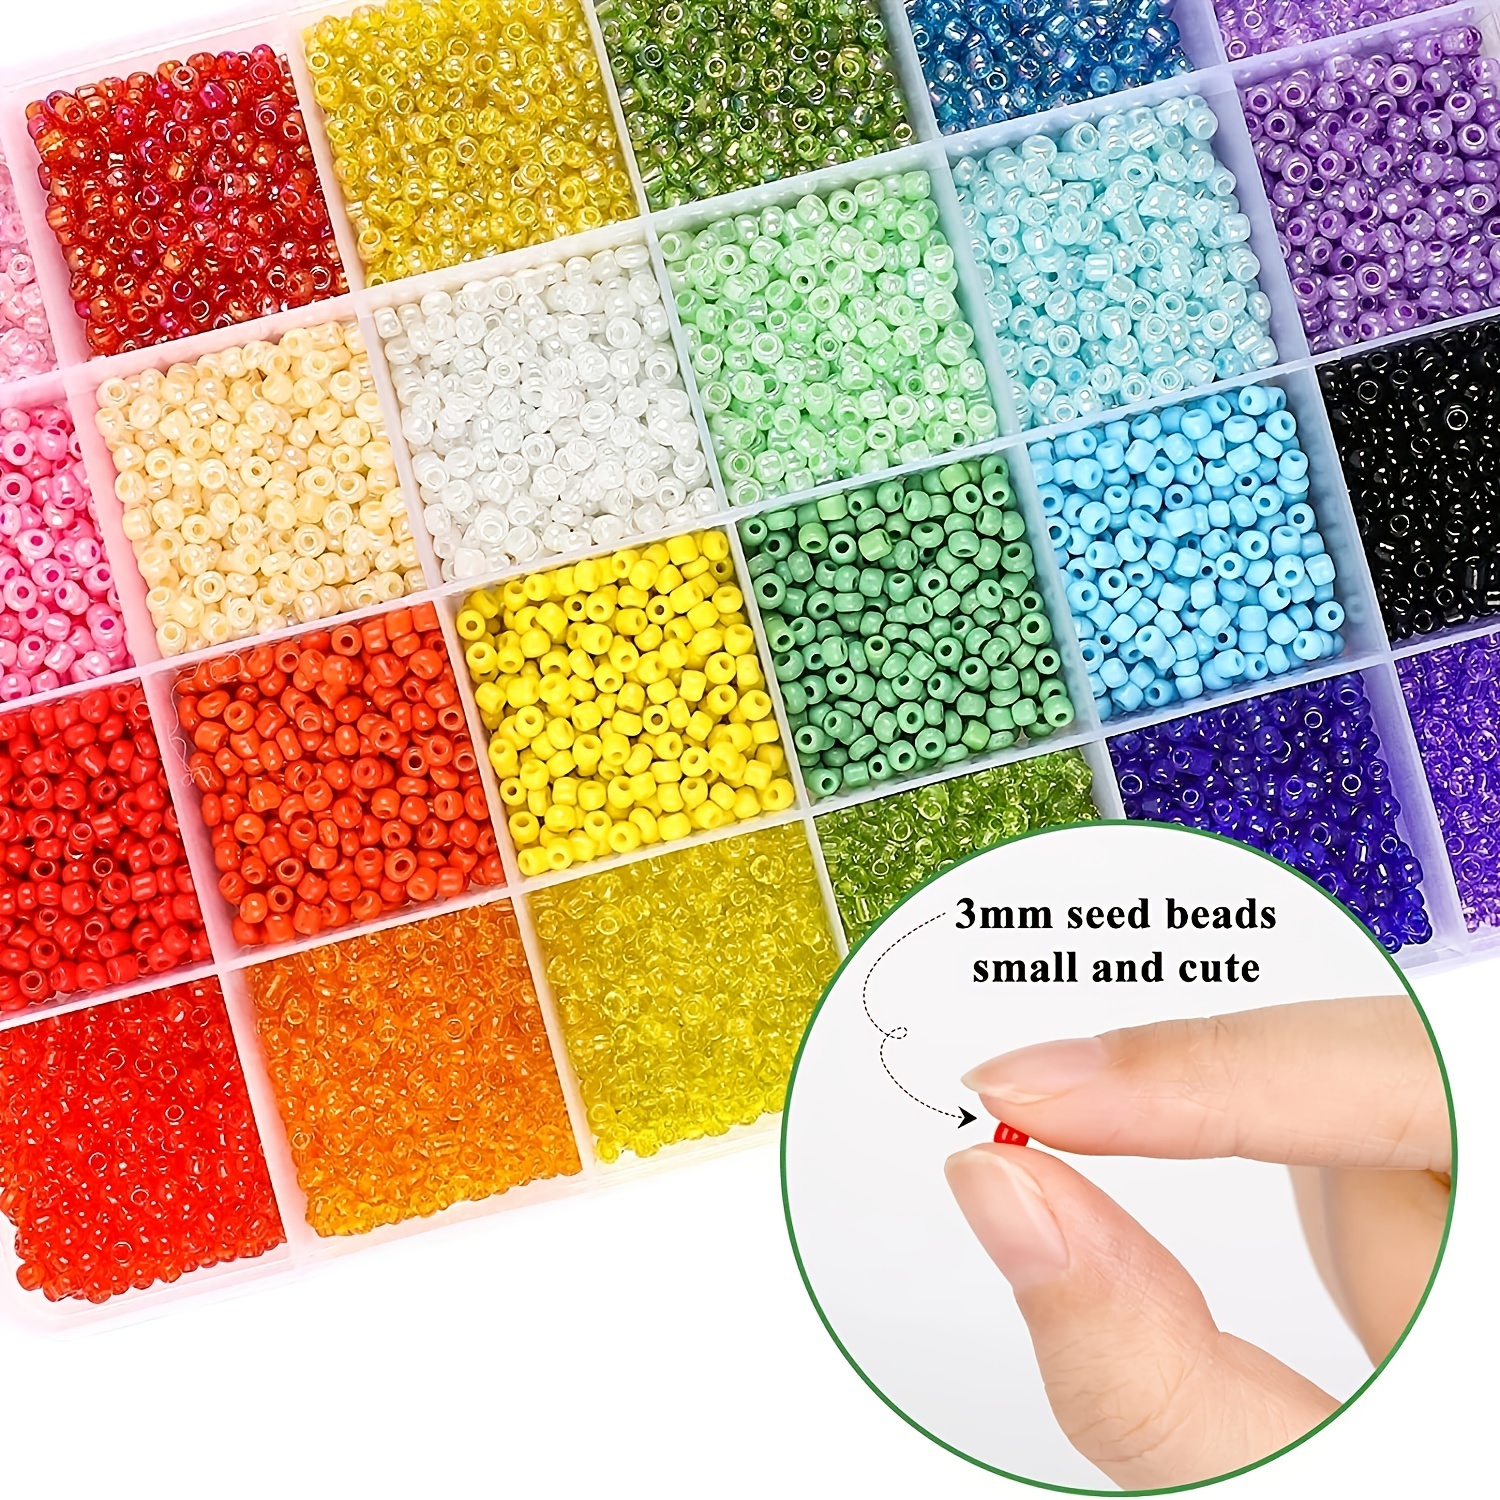 Urradia 35000pcs 2mm 12/0 Glass Seed Beads for Jewelry Making Supplies Kit Small Bead Craft Set Bracelets Necklace Ring Making Kits Glass Seed Letter Alphabet